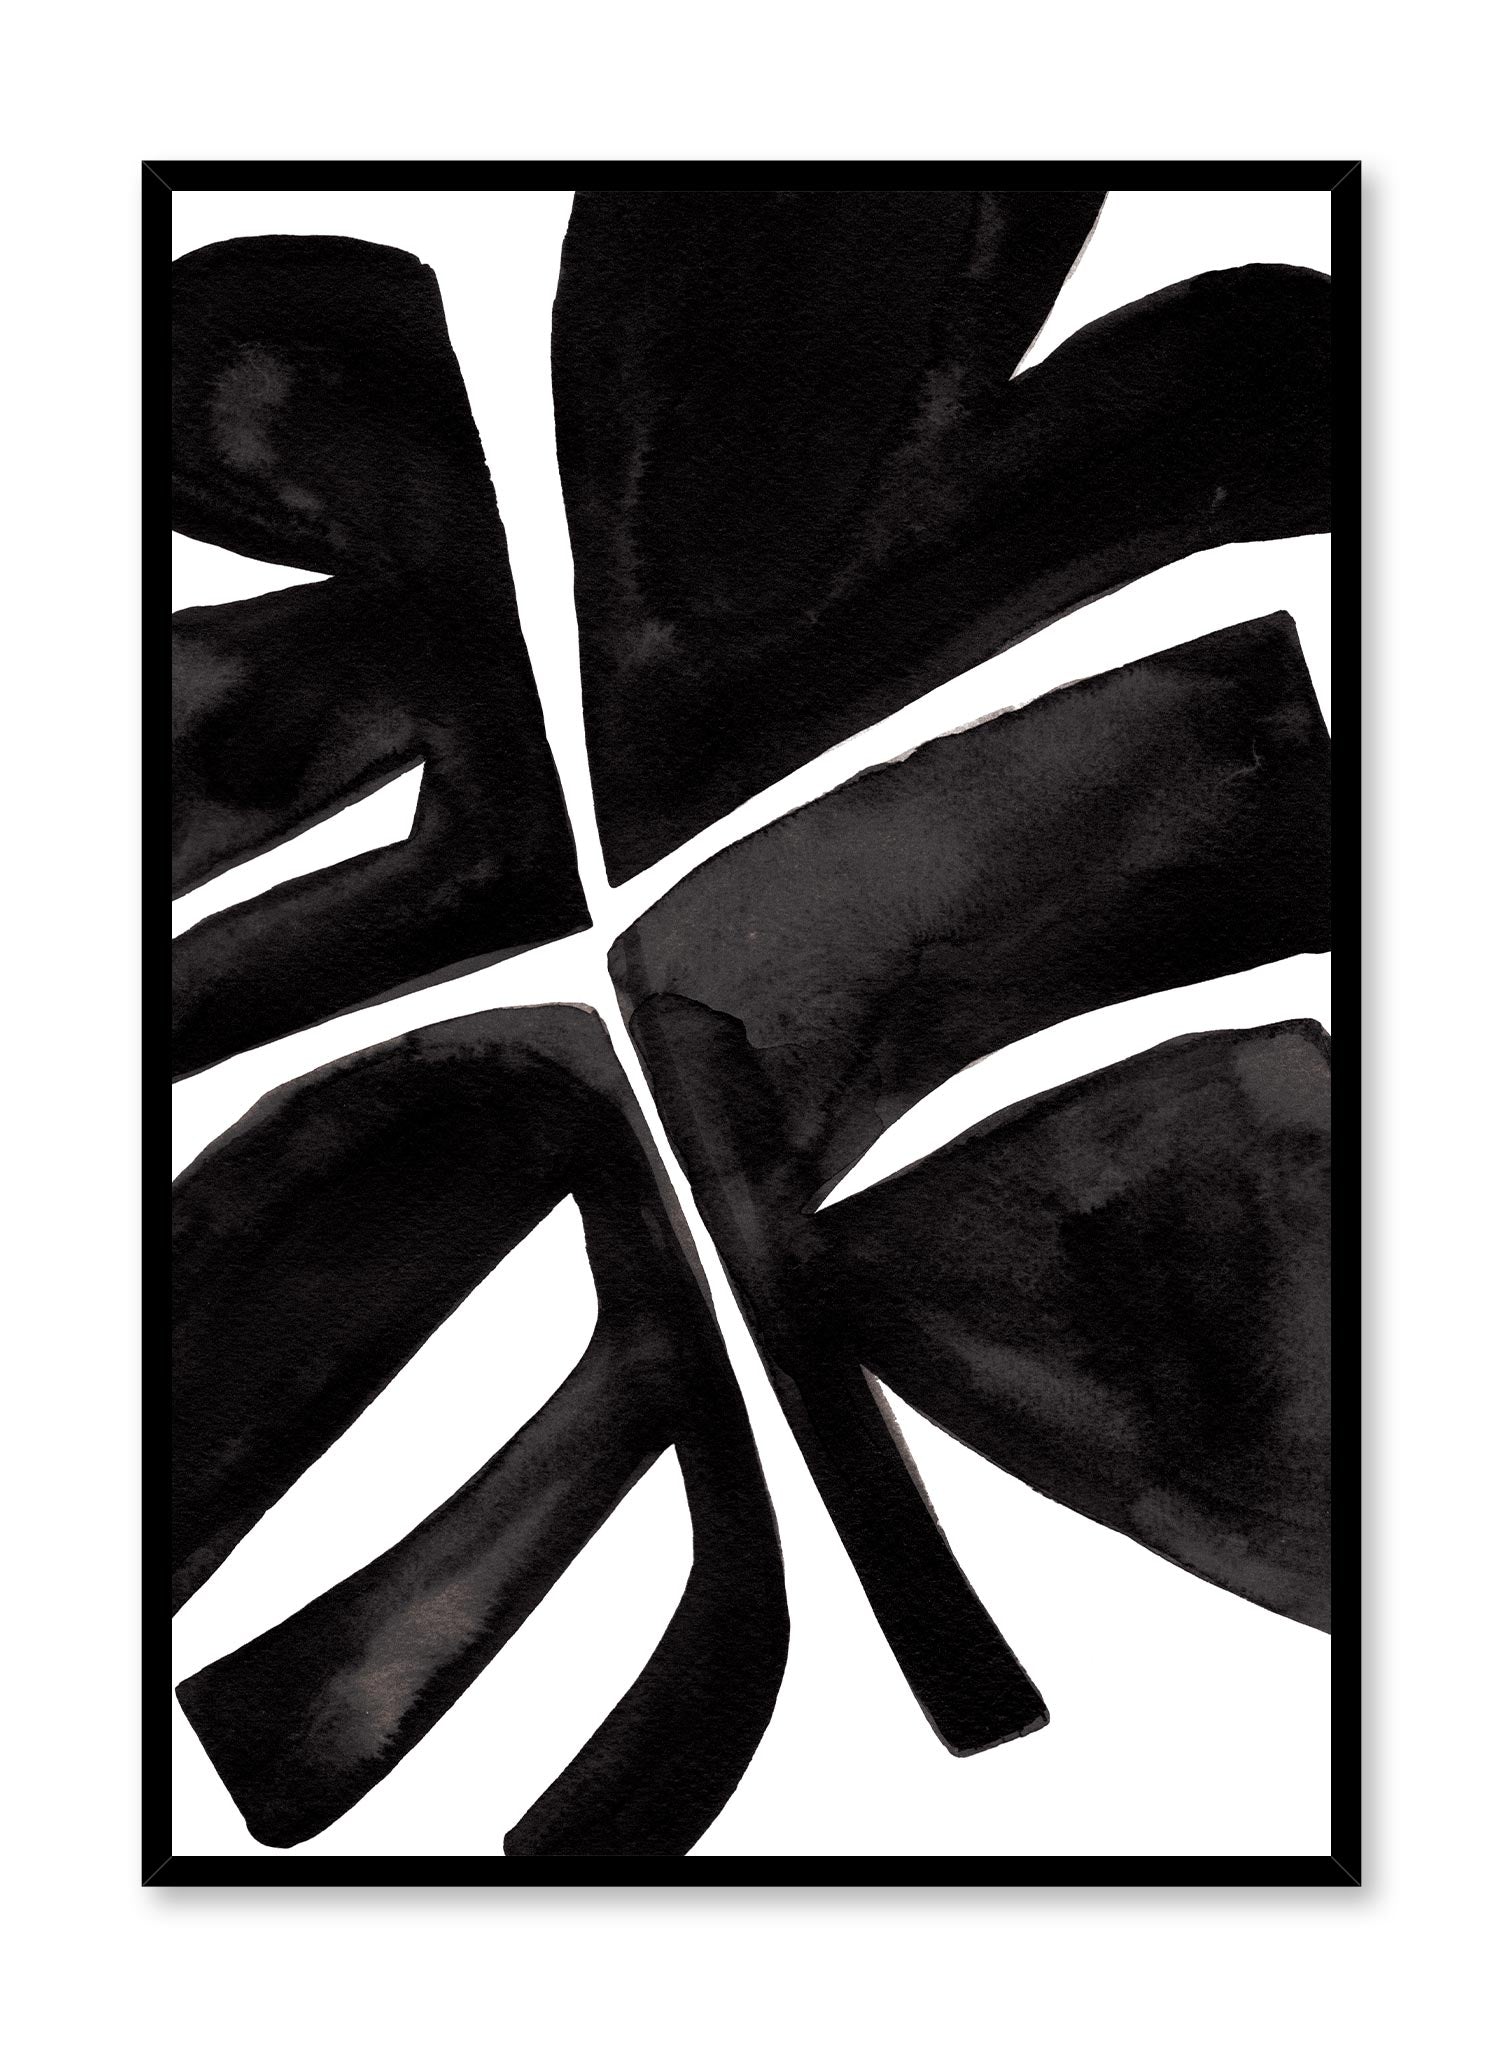 Minimalist Monstera is a minimalist illustration by Opposite Wall of the close-up of a leaf pattern drawn in ink.